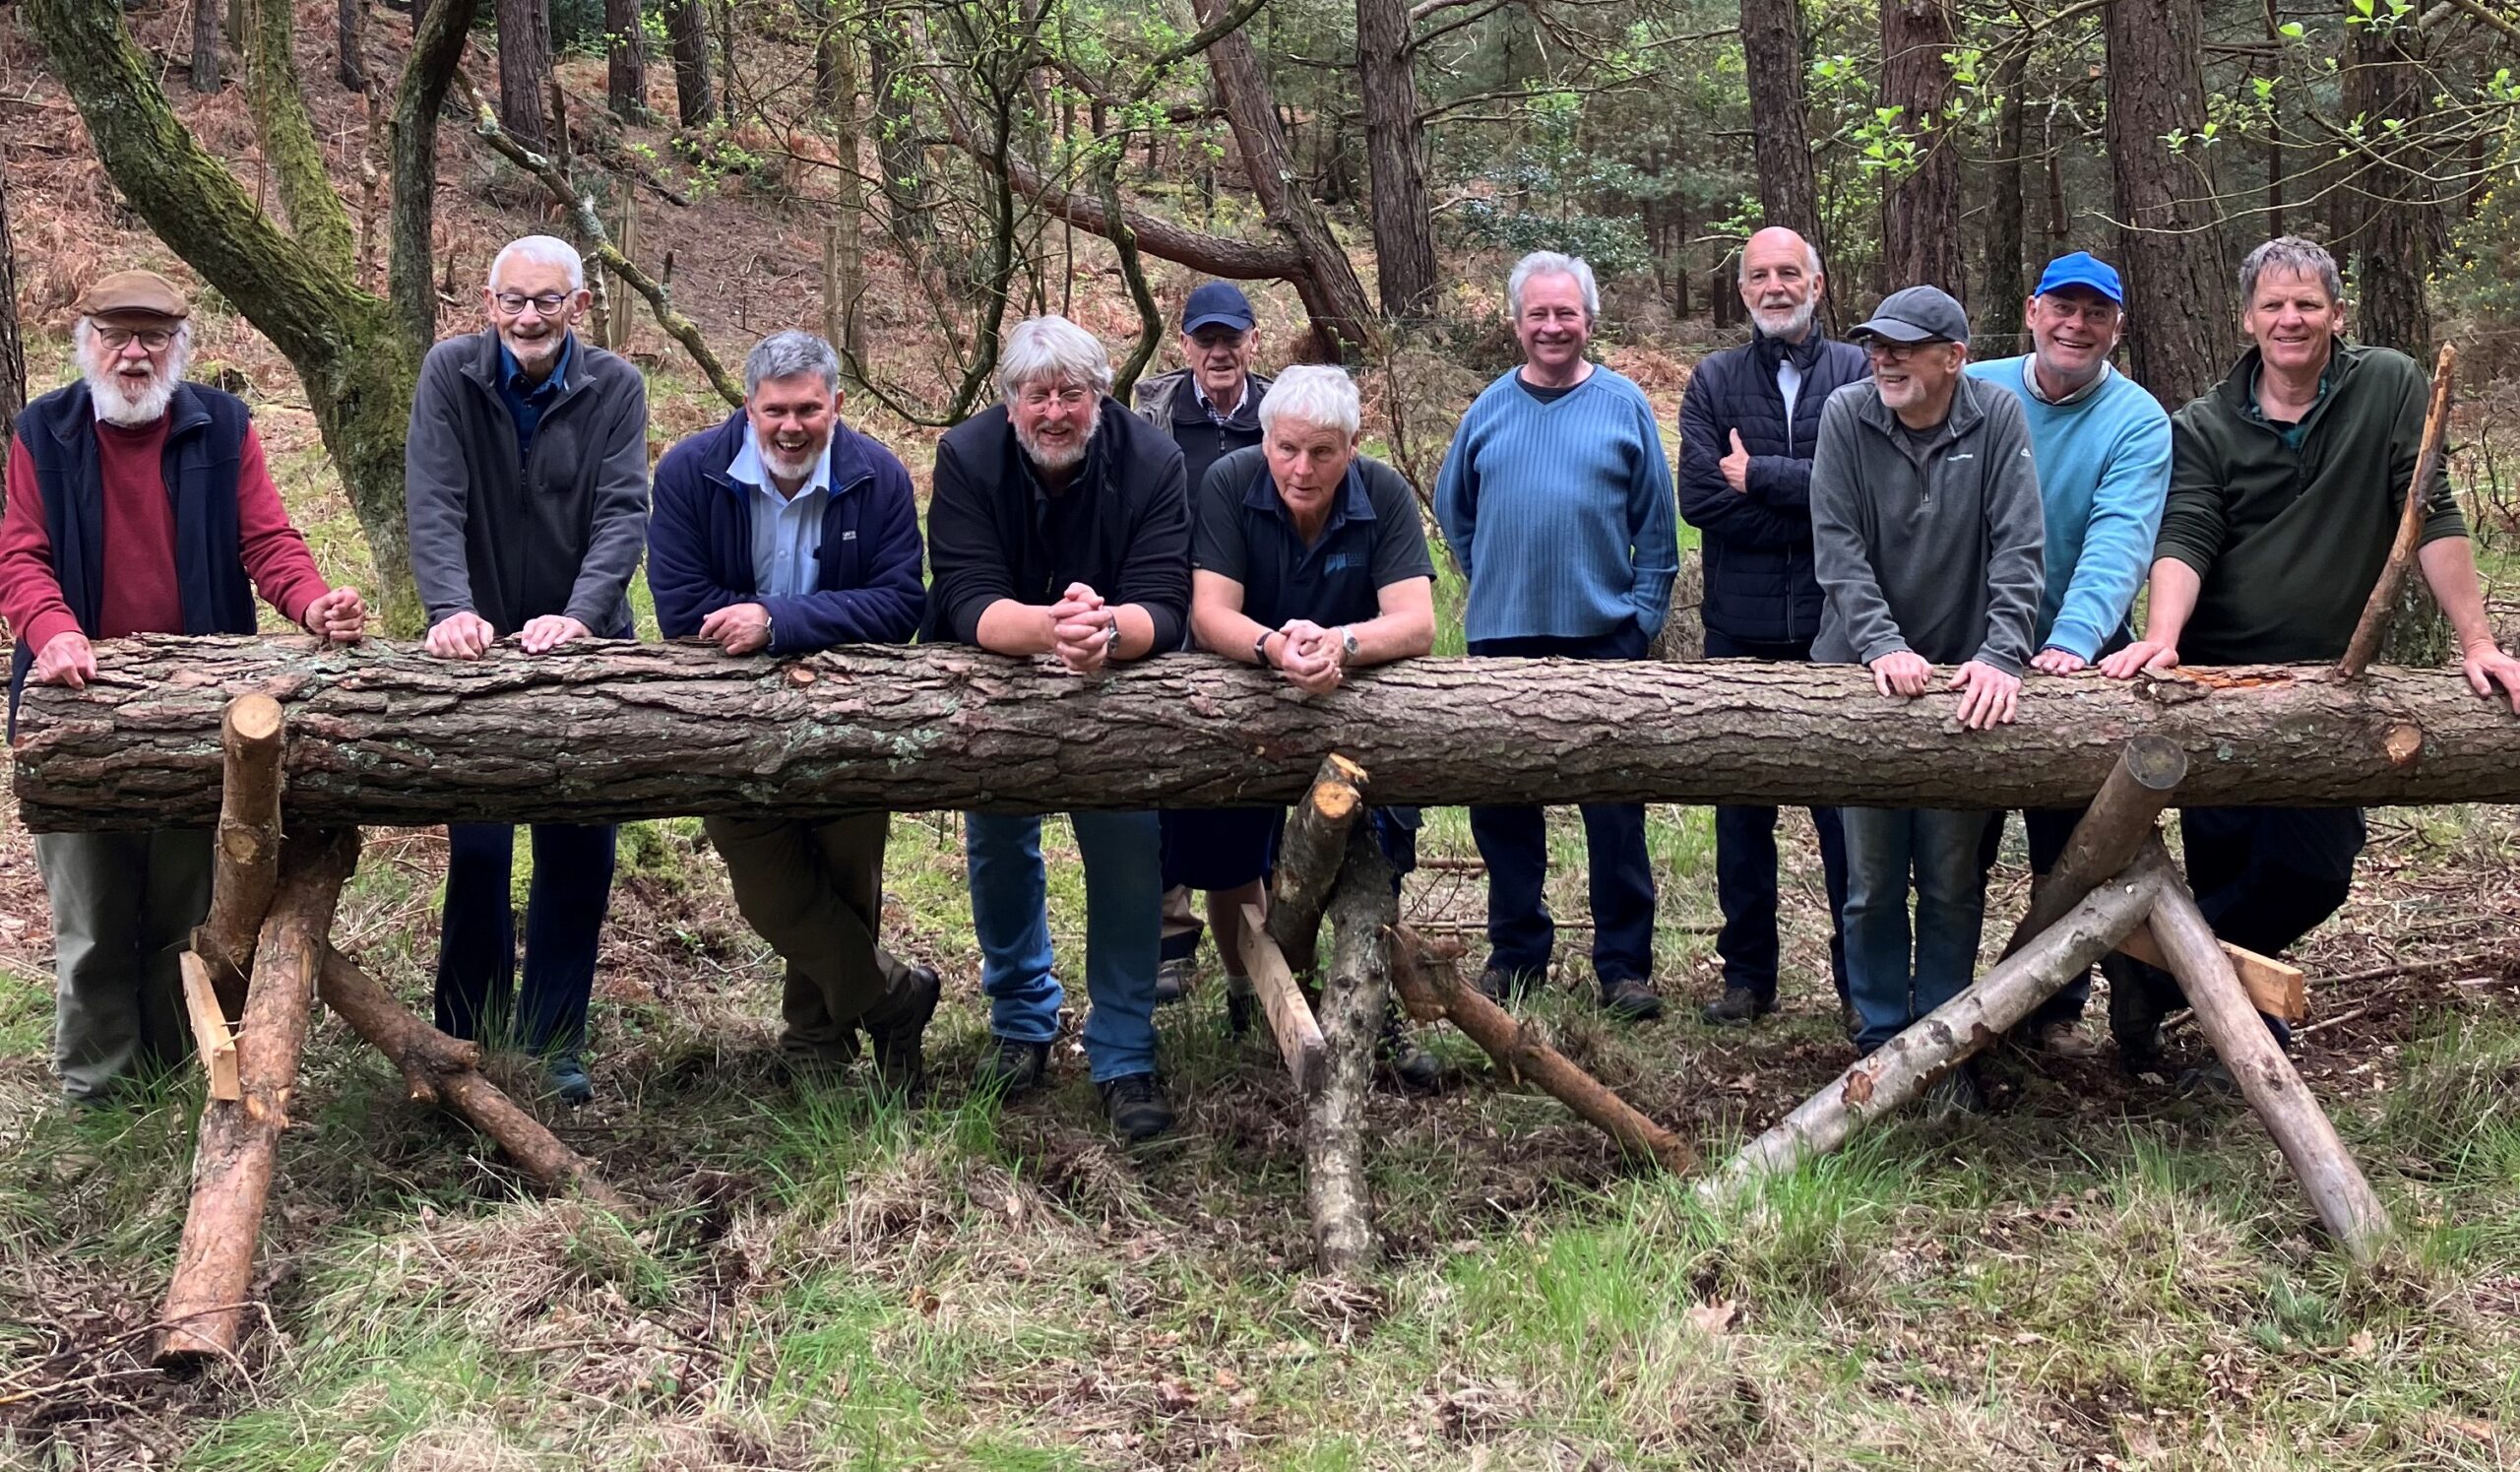 Members of the Men's Shed team with the log, ready for work...